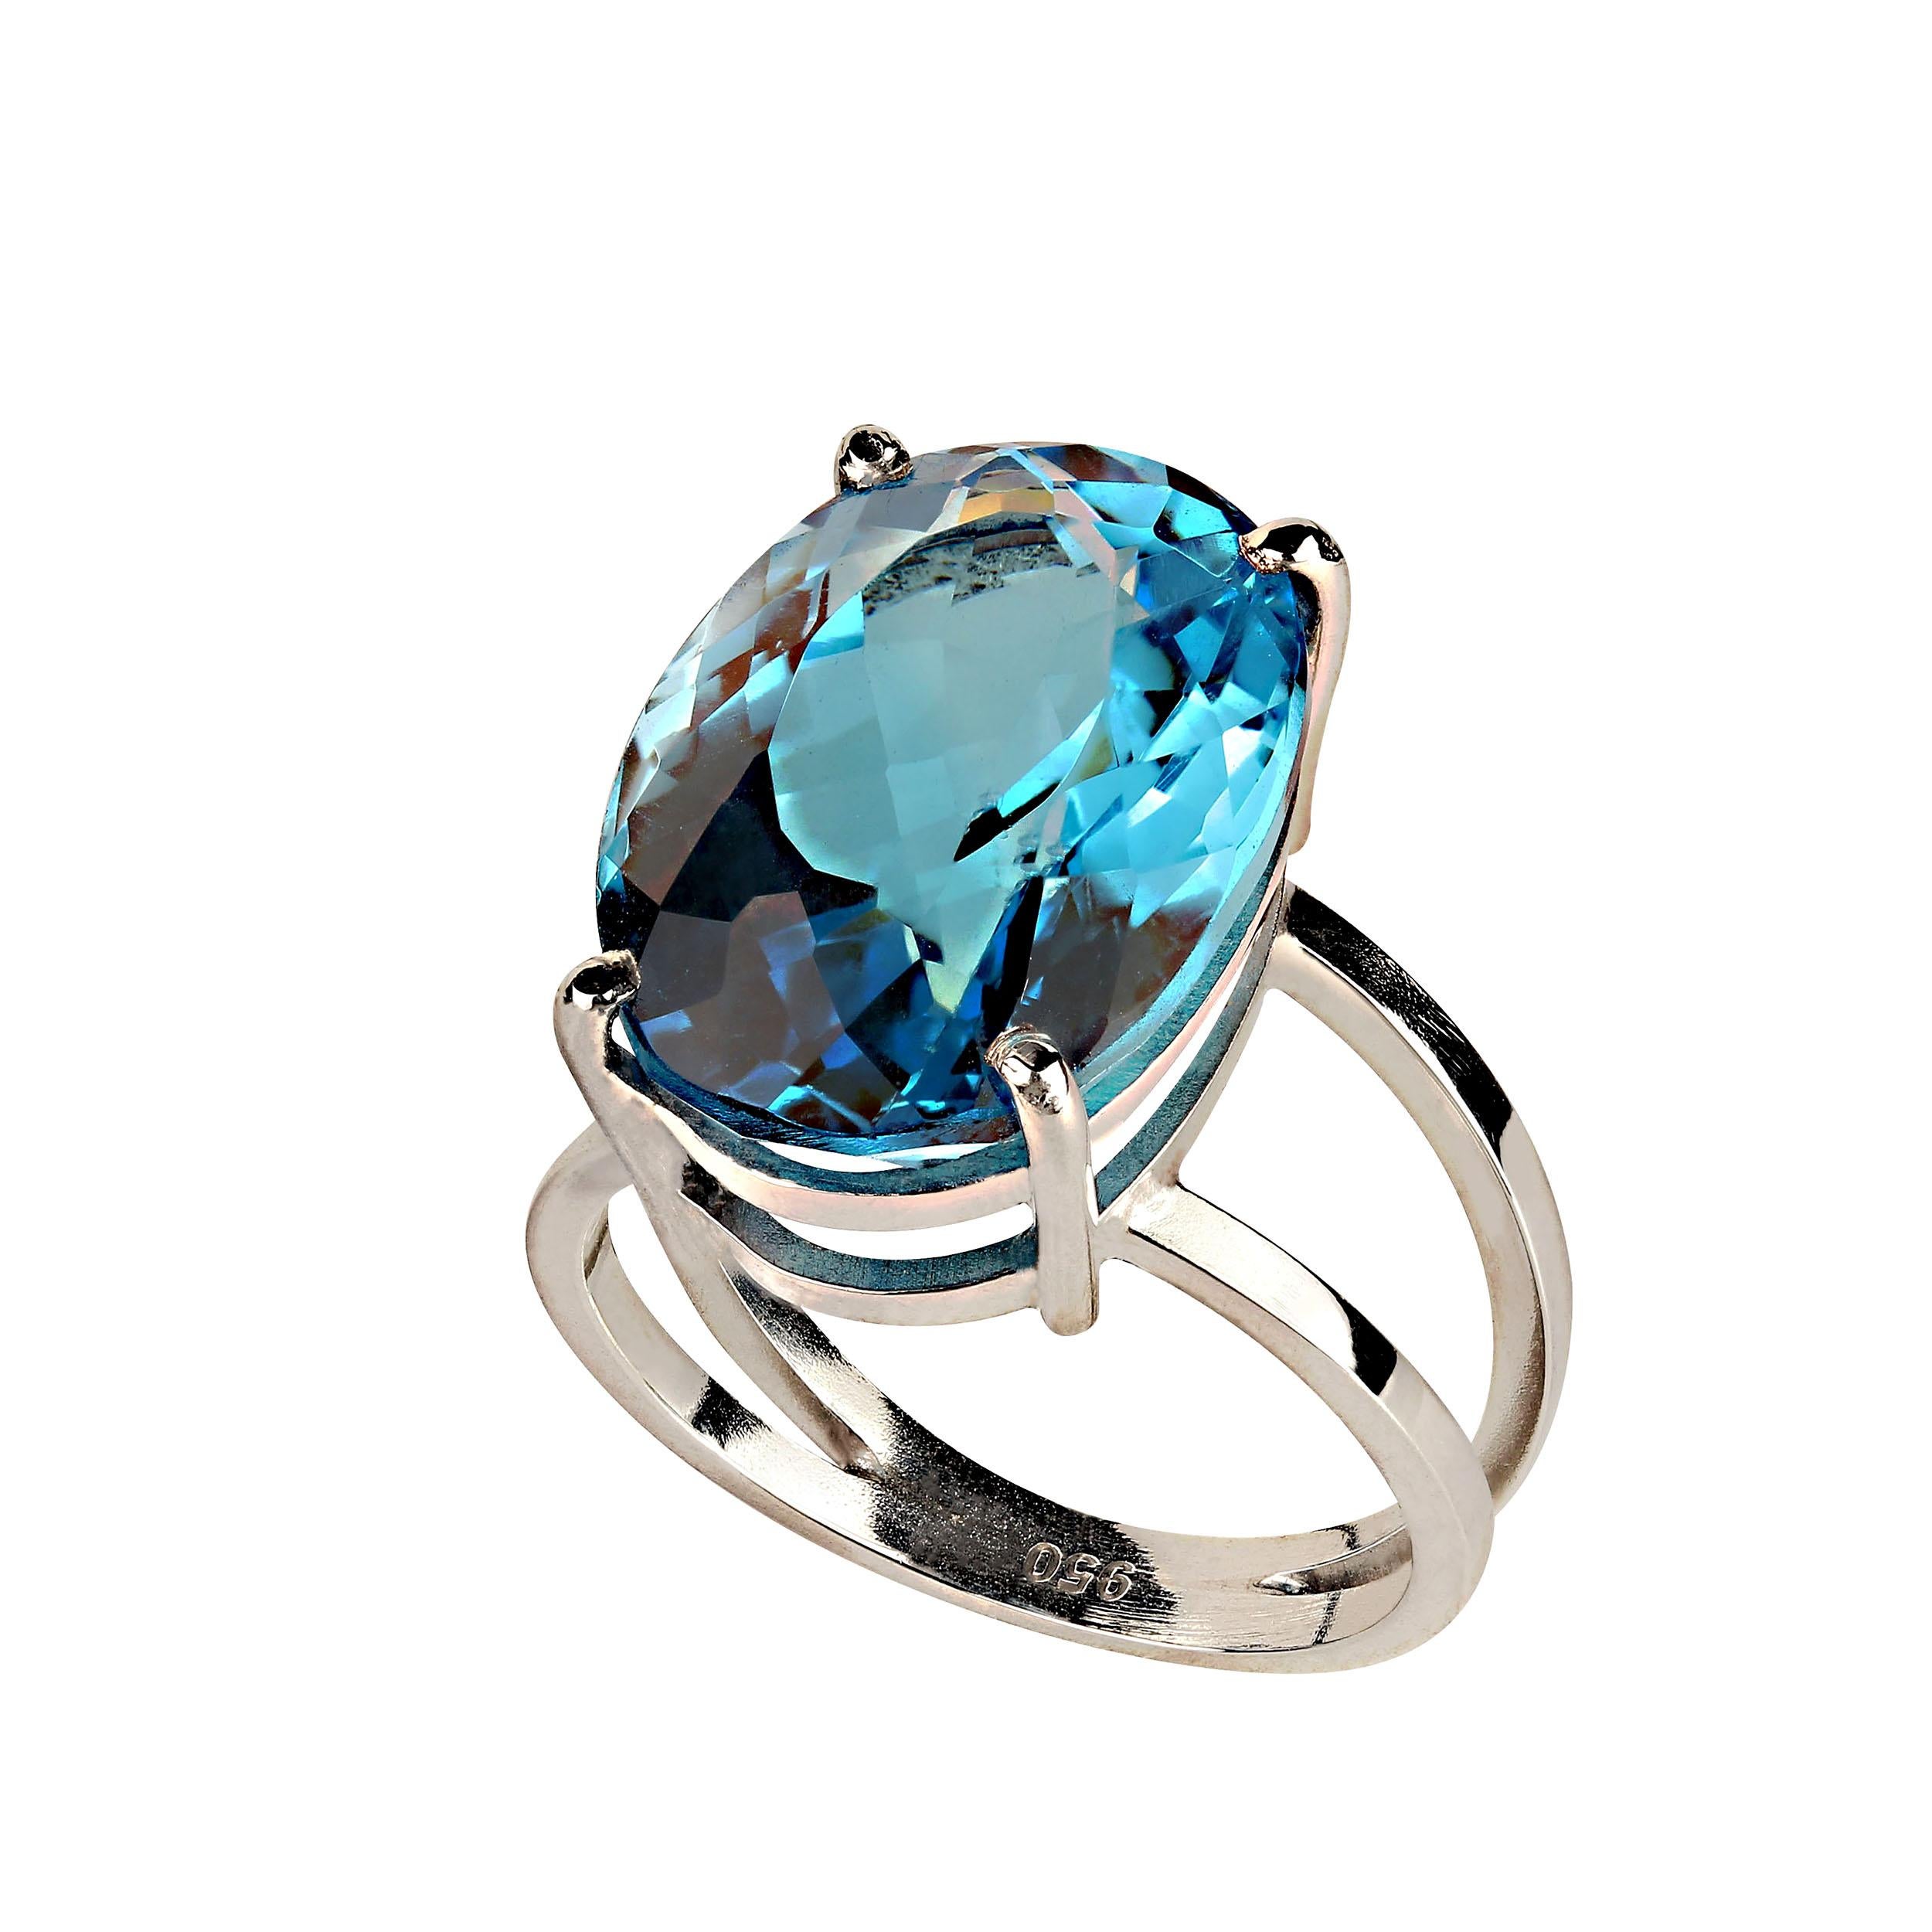 Artisan AJD Scintillating 17ct Swiss Blue Topaz and Sterling Silver Ring For Sale